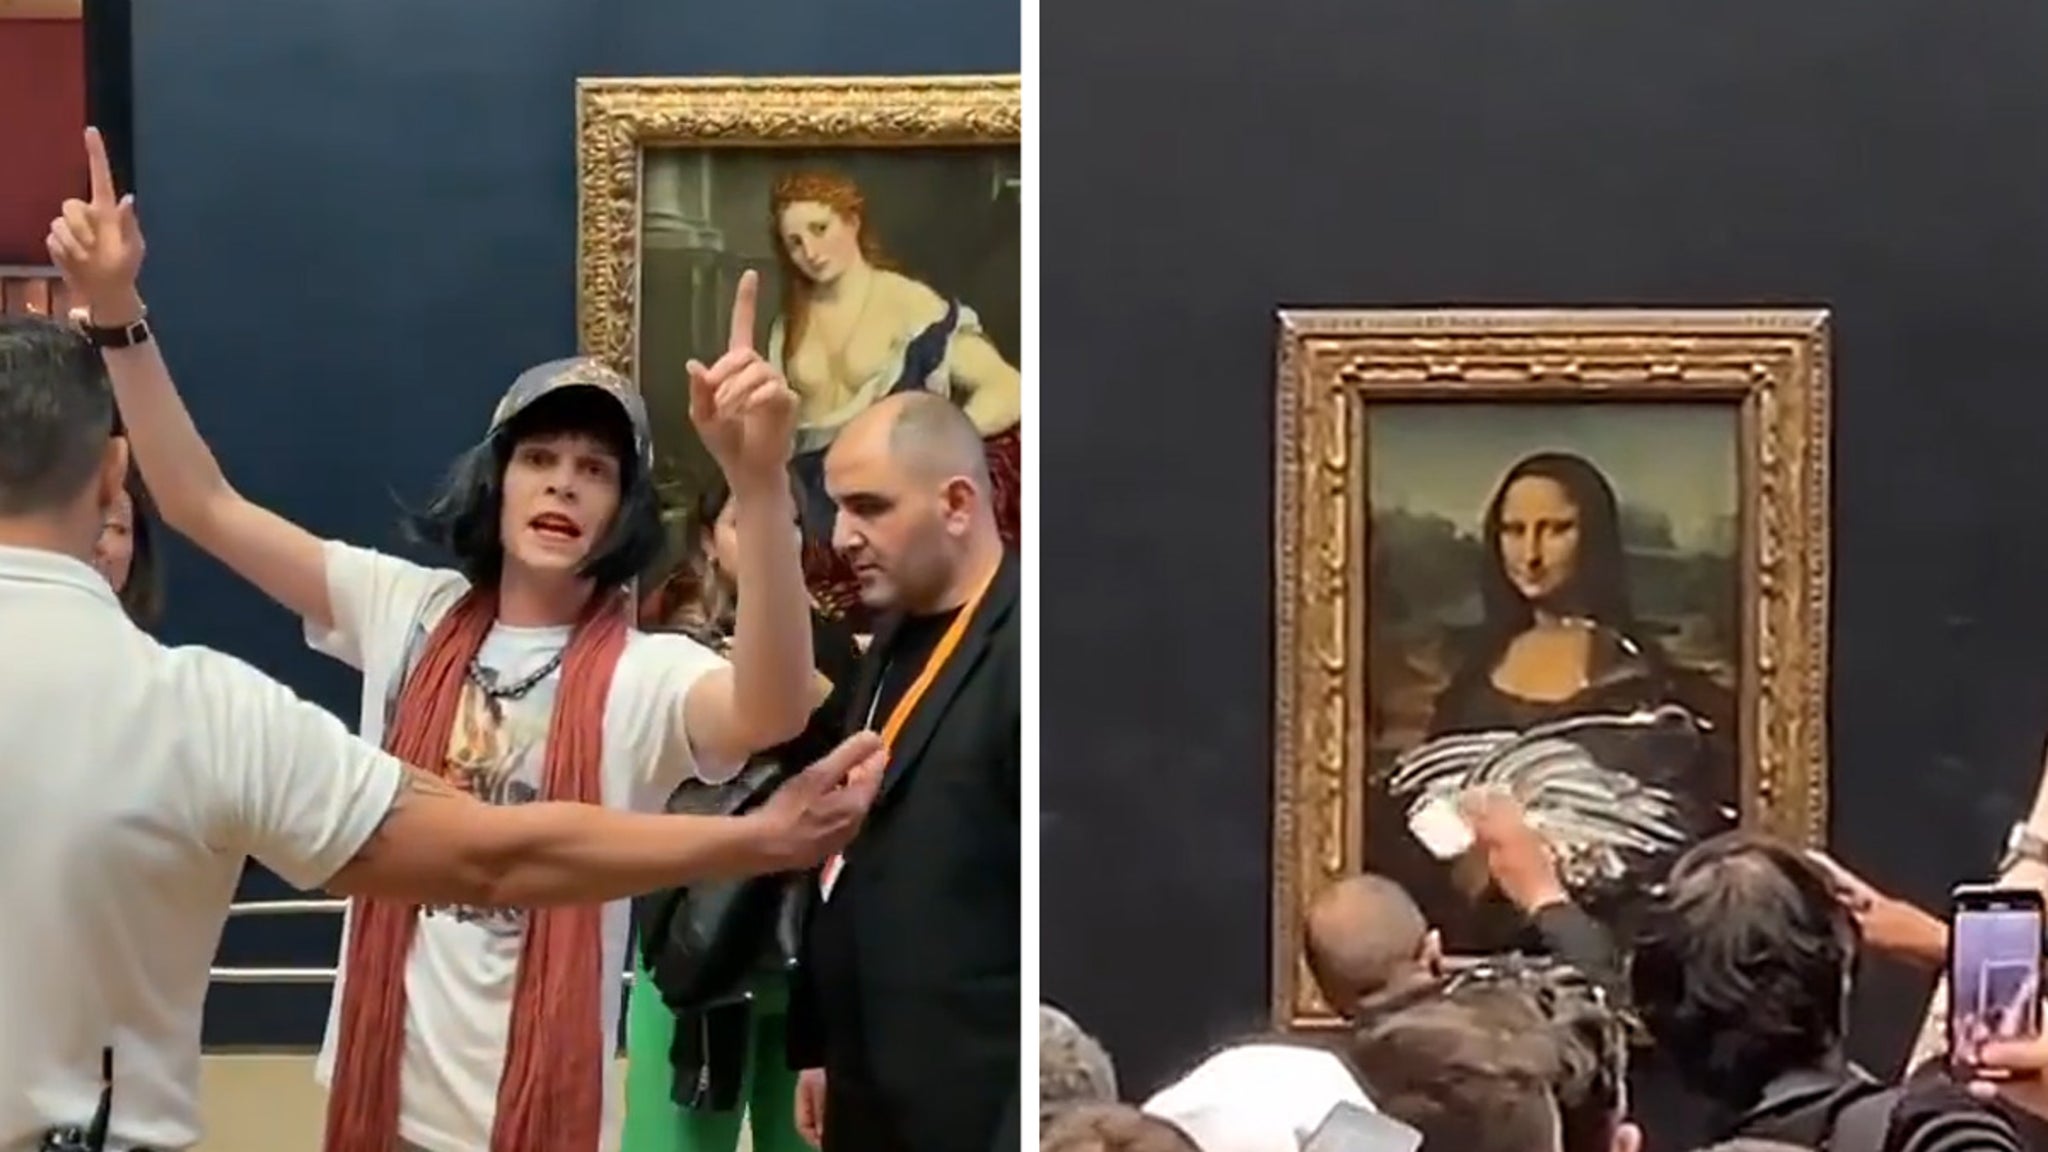 Man in Wheelchair Disguised as Woman Throws Cake at Mona Lisa